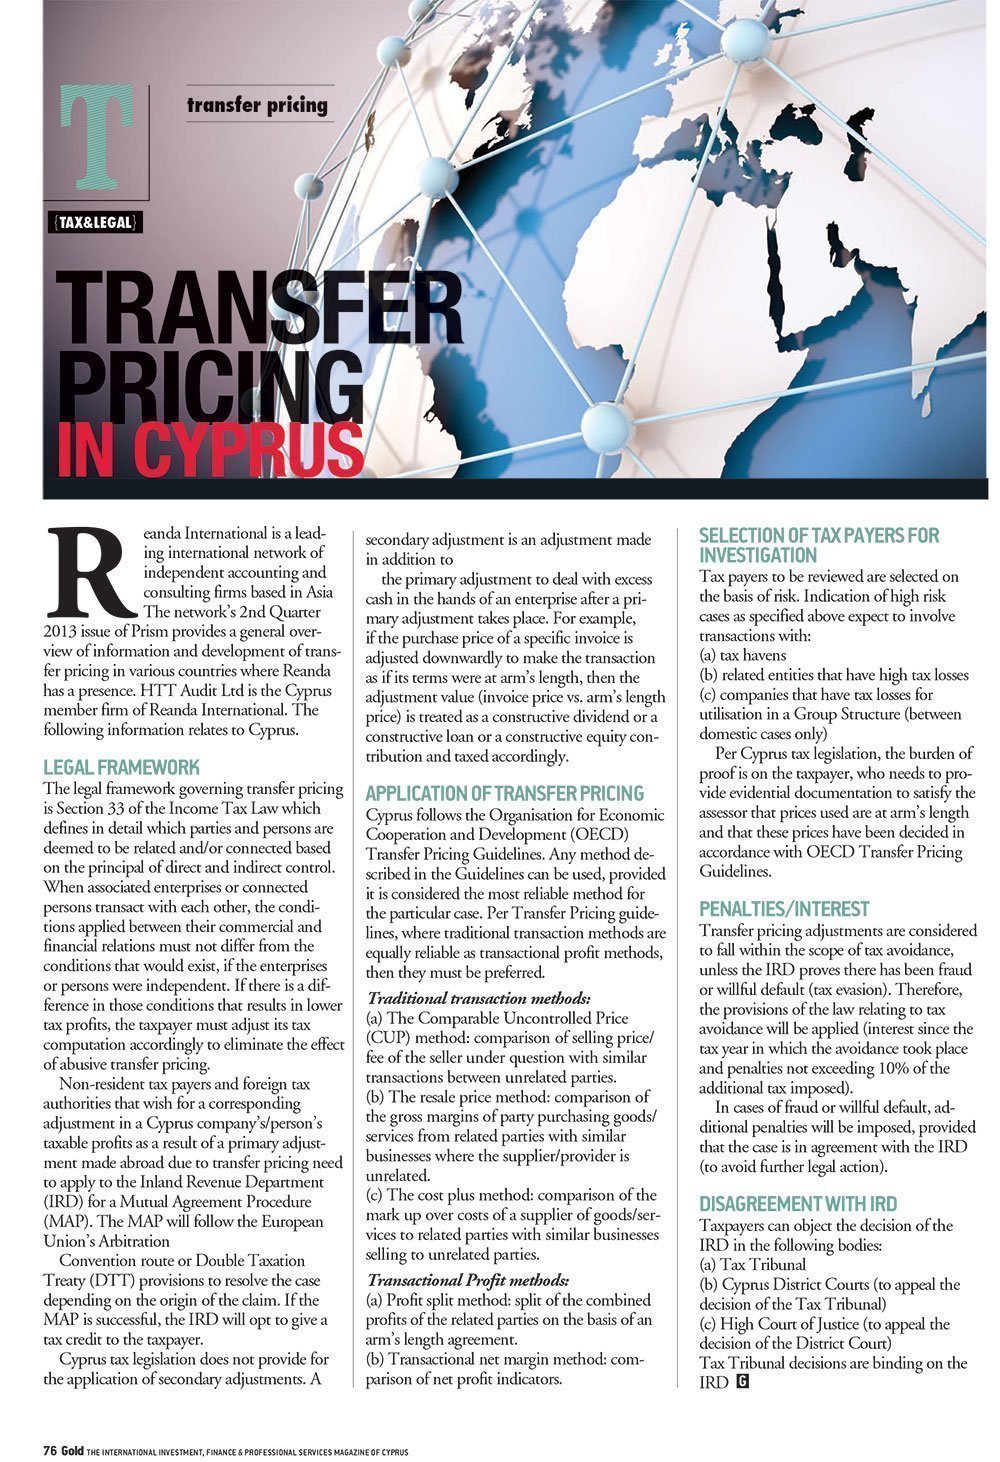 HTT-article-hosted-by-Gold-Magazine--about-transfer-Pricing-rules-in-Cyprus